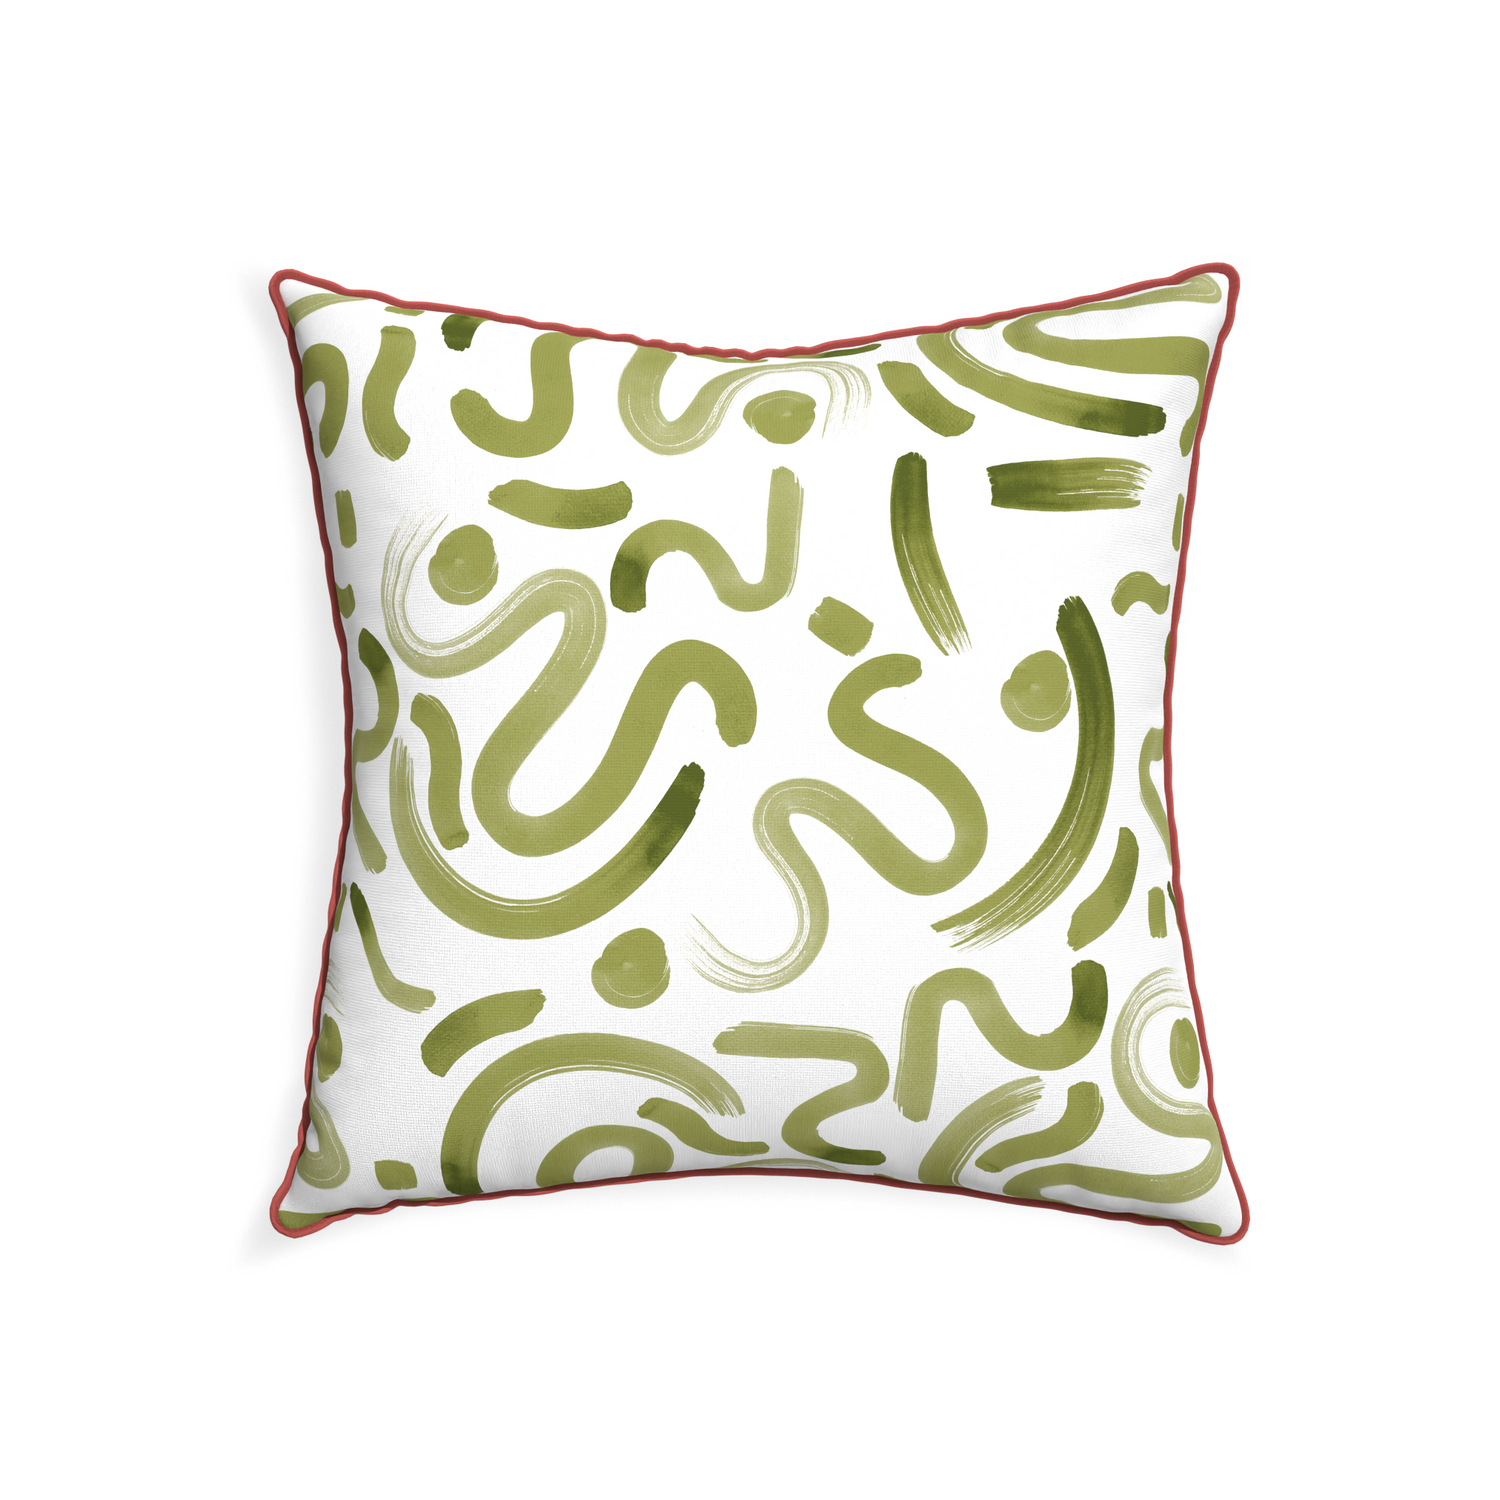 22-square hockney moss custom pillow with c piping on white background